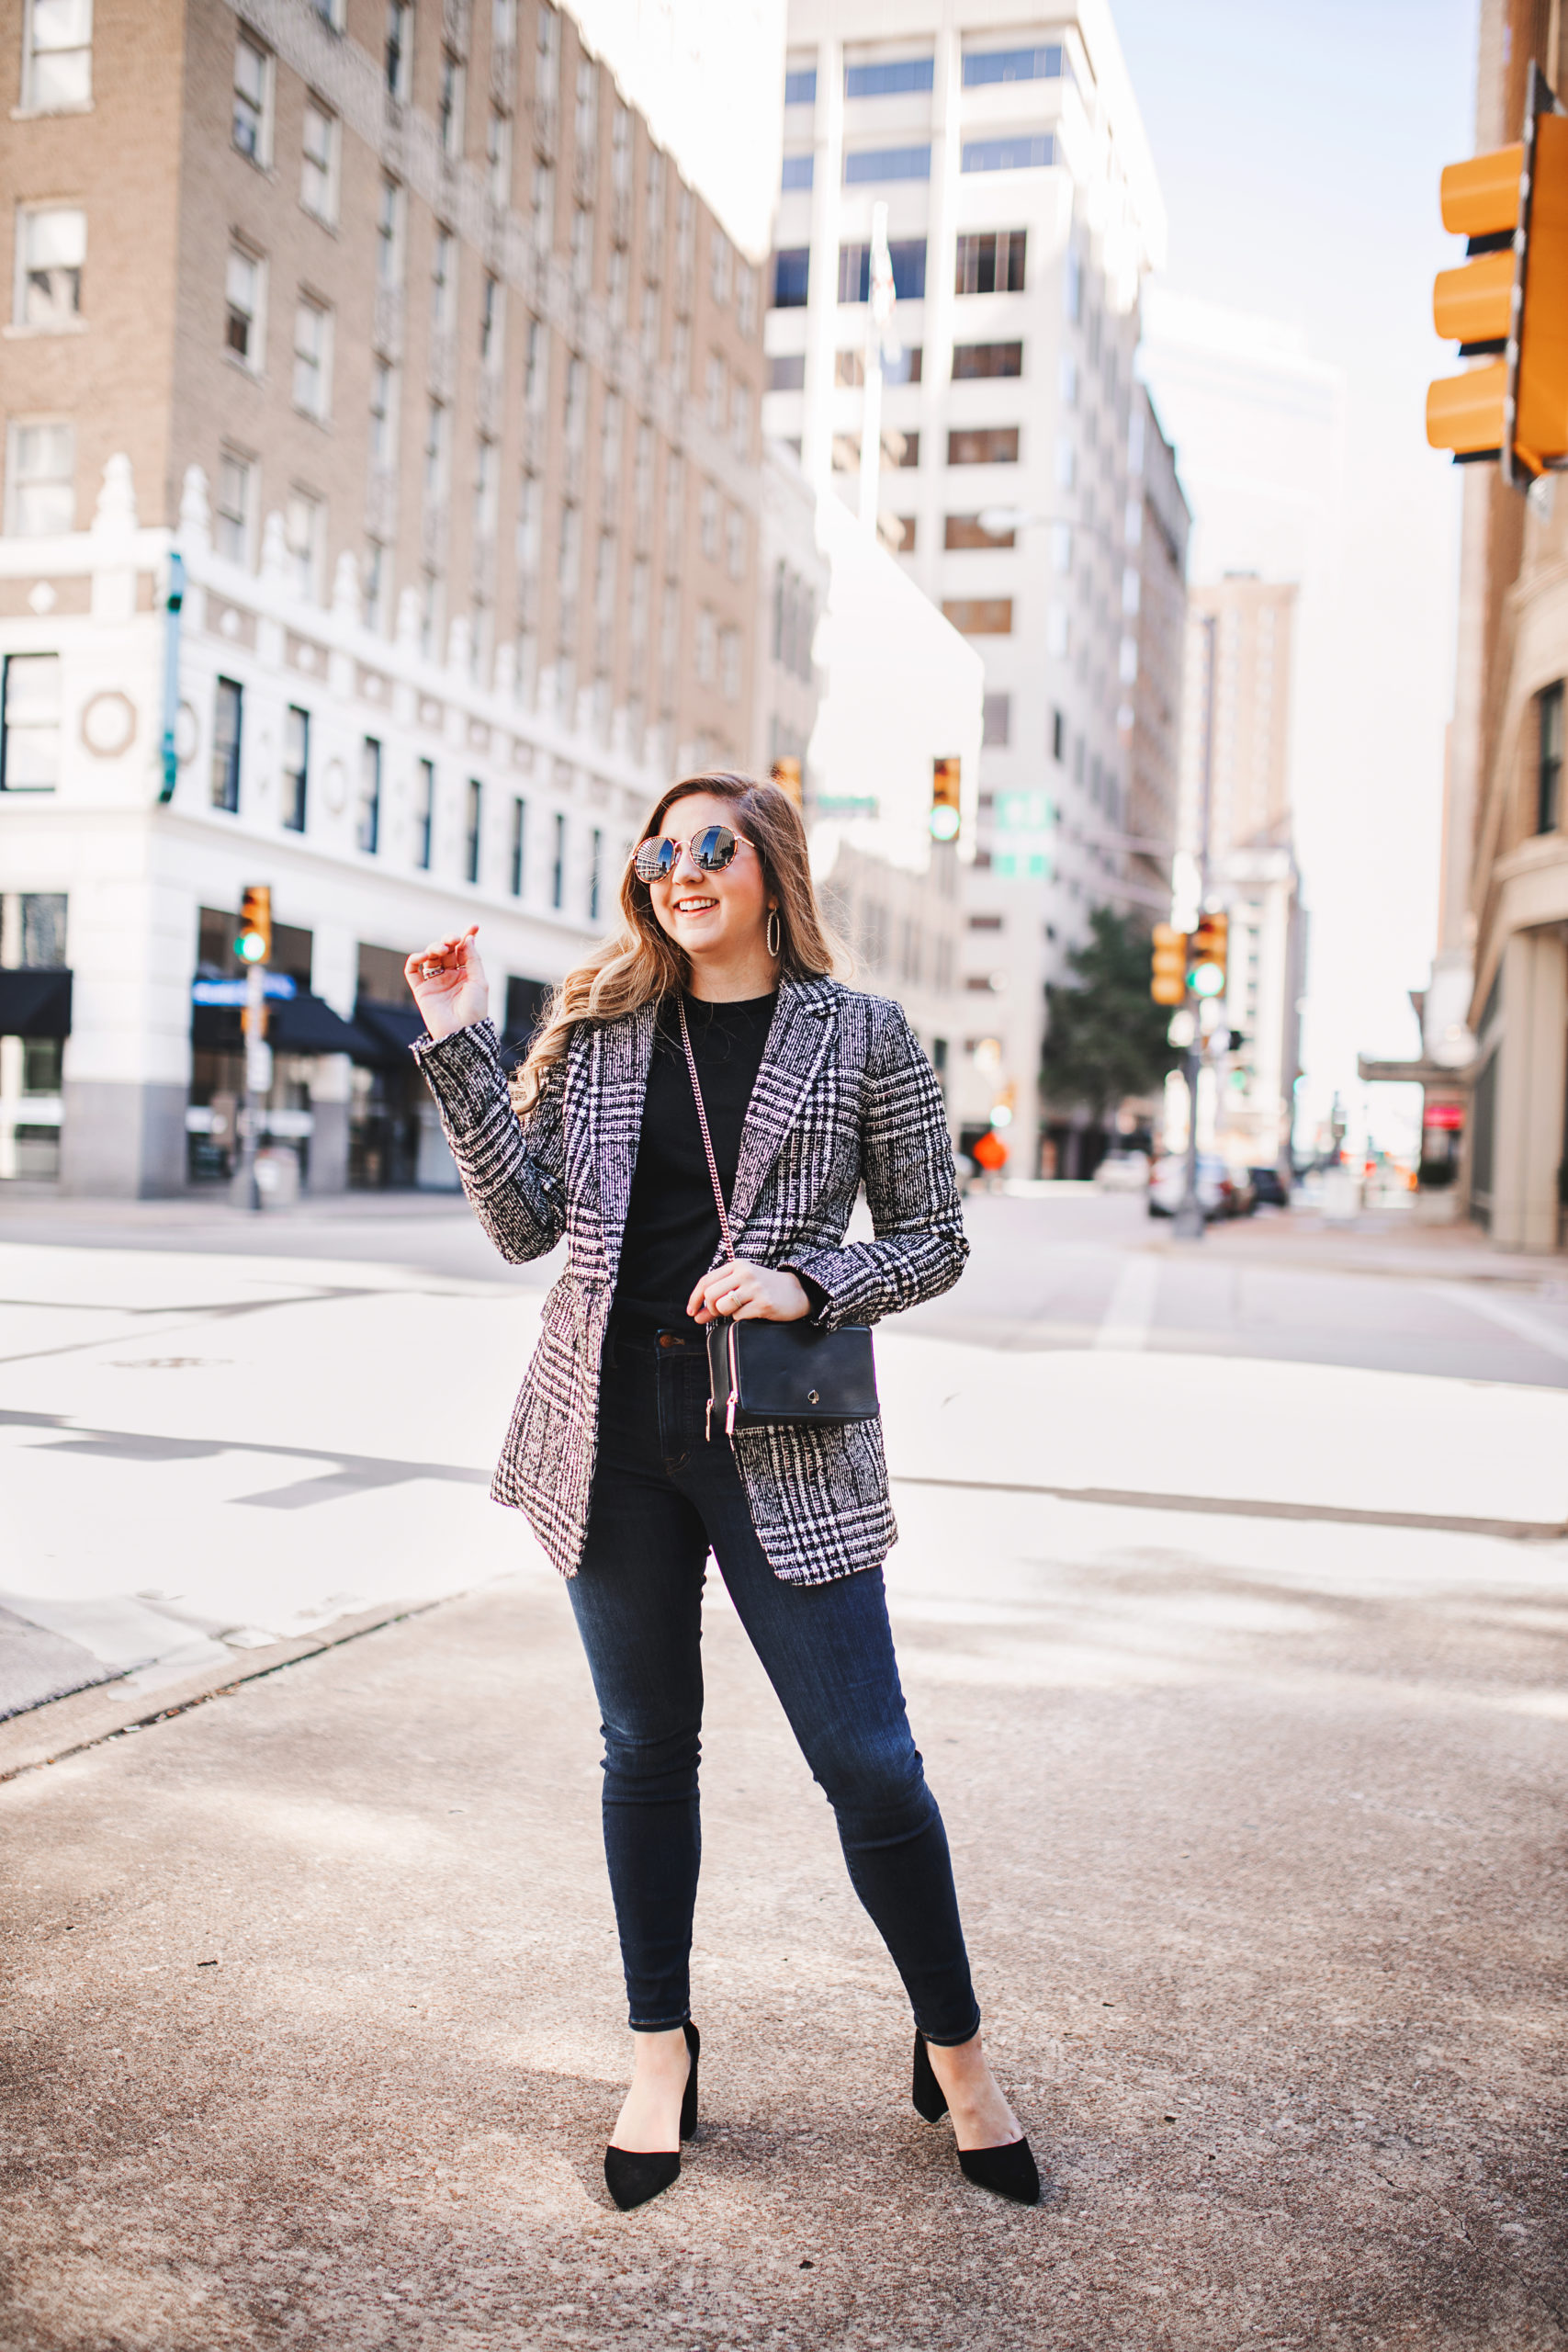 A Pineapple Blazer Work Thrifty How Long To - Style For